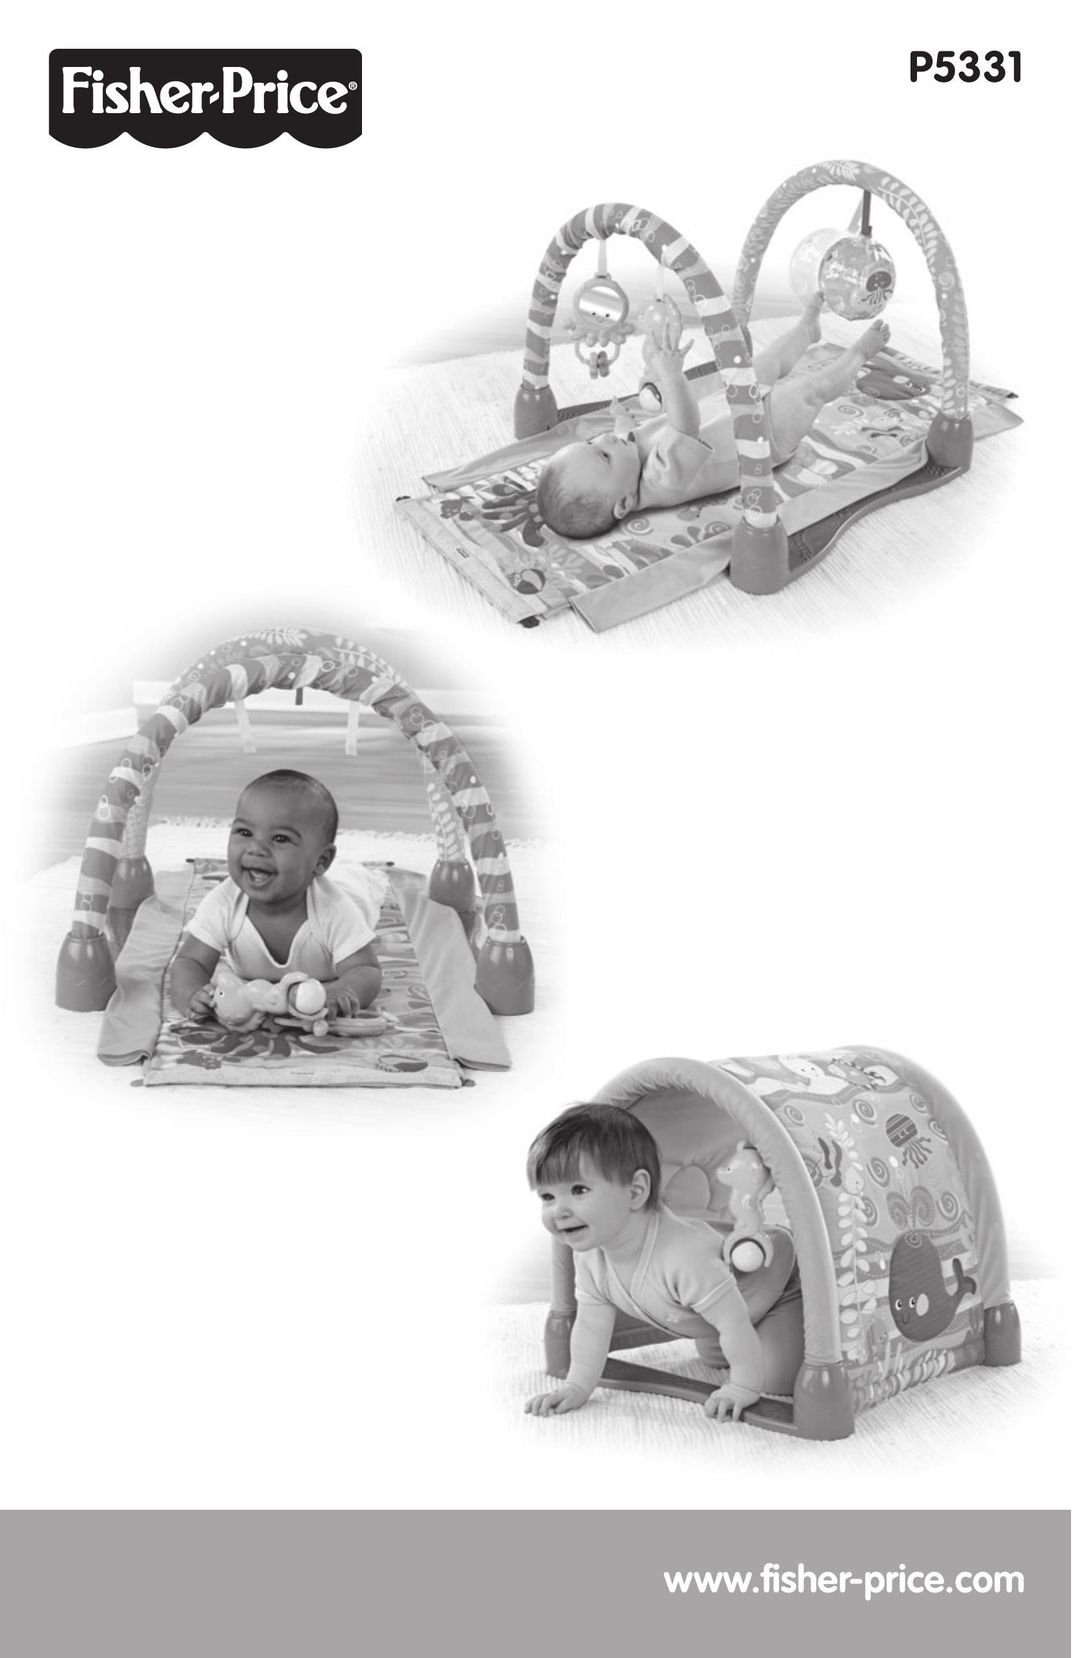 Fisher-Price P5331 Baby Gym User Manual